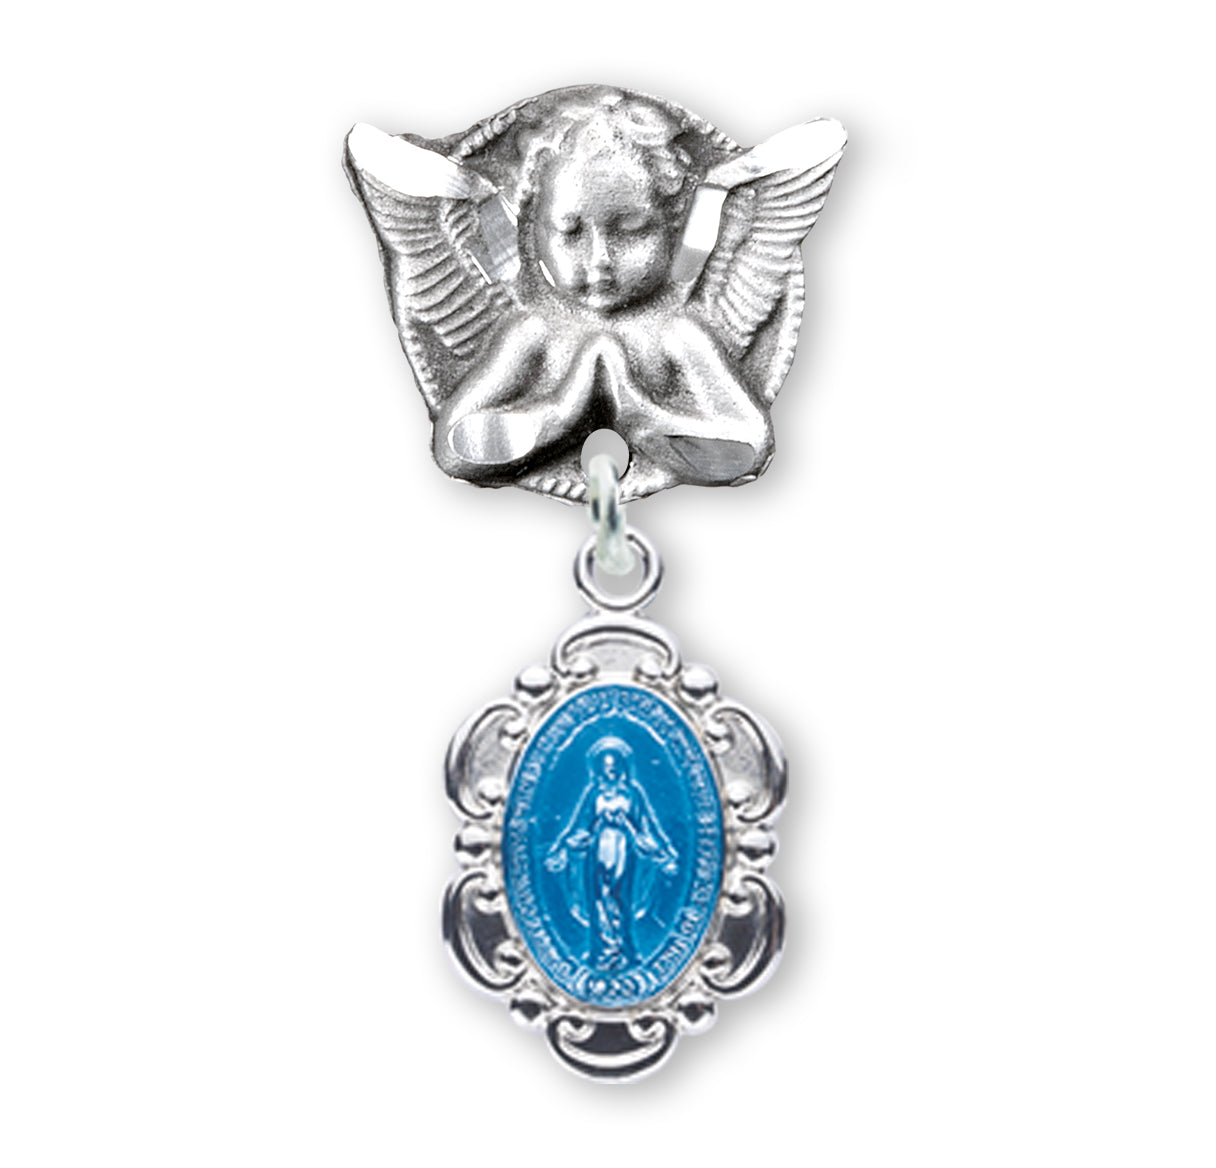 Blue Enameled Oval Fancy Edge Miraculous Baby Medal on an Angel Pin